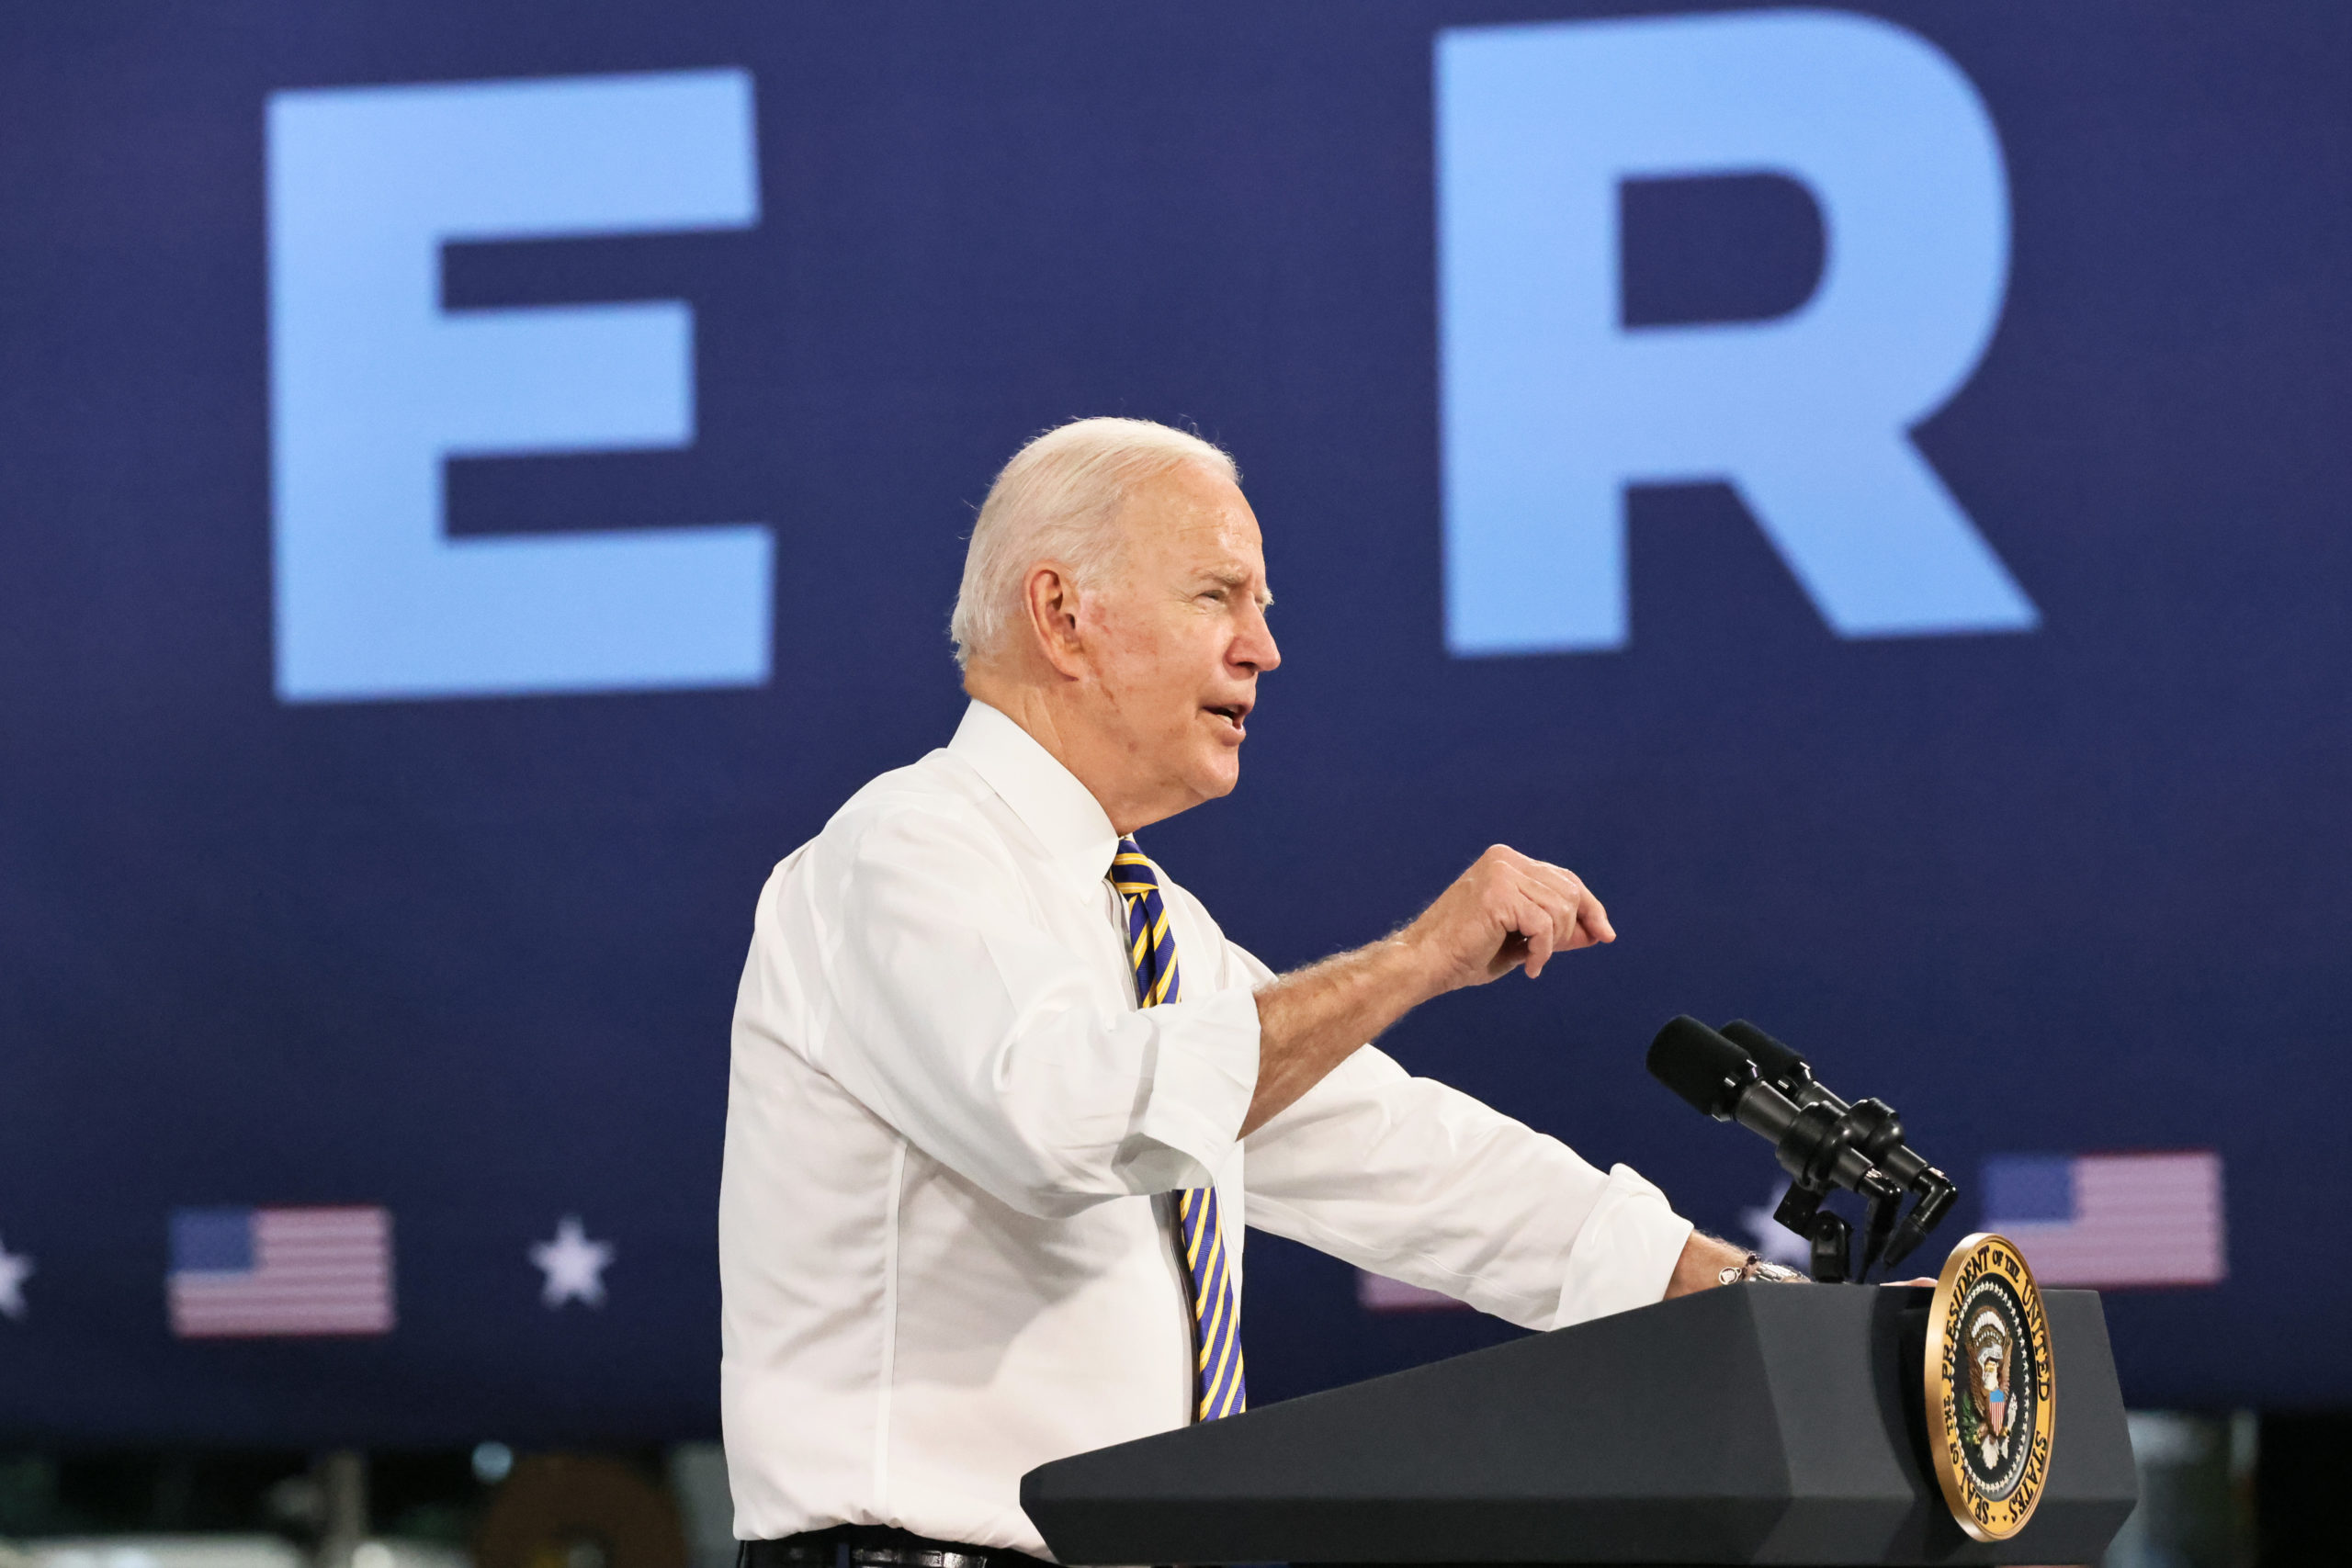 President Joe Biden speaks at a truck facility on Wednesday in Macungie, Pennsylvania. (Michael M. Santiago/Getty Images)